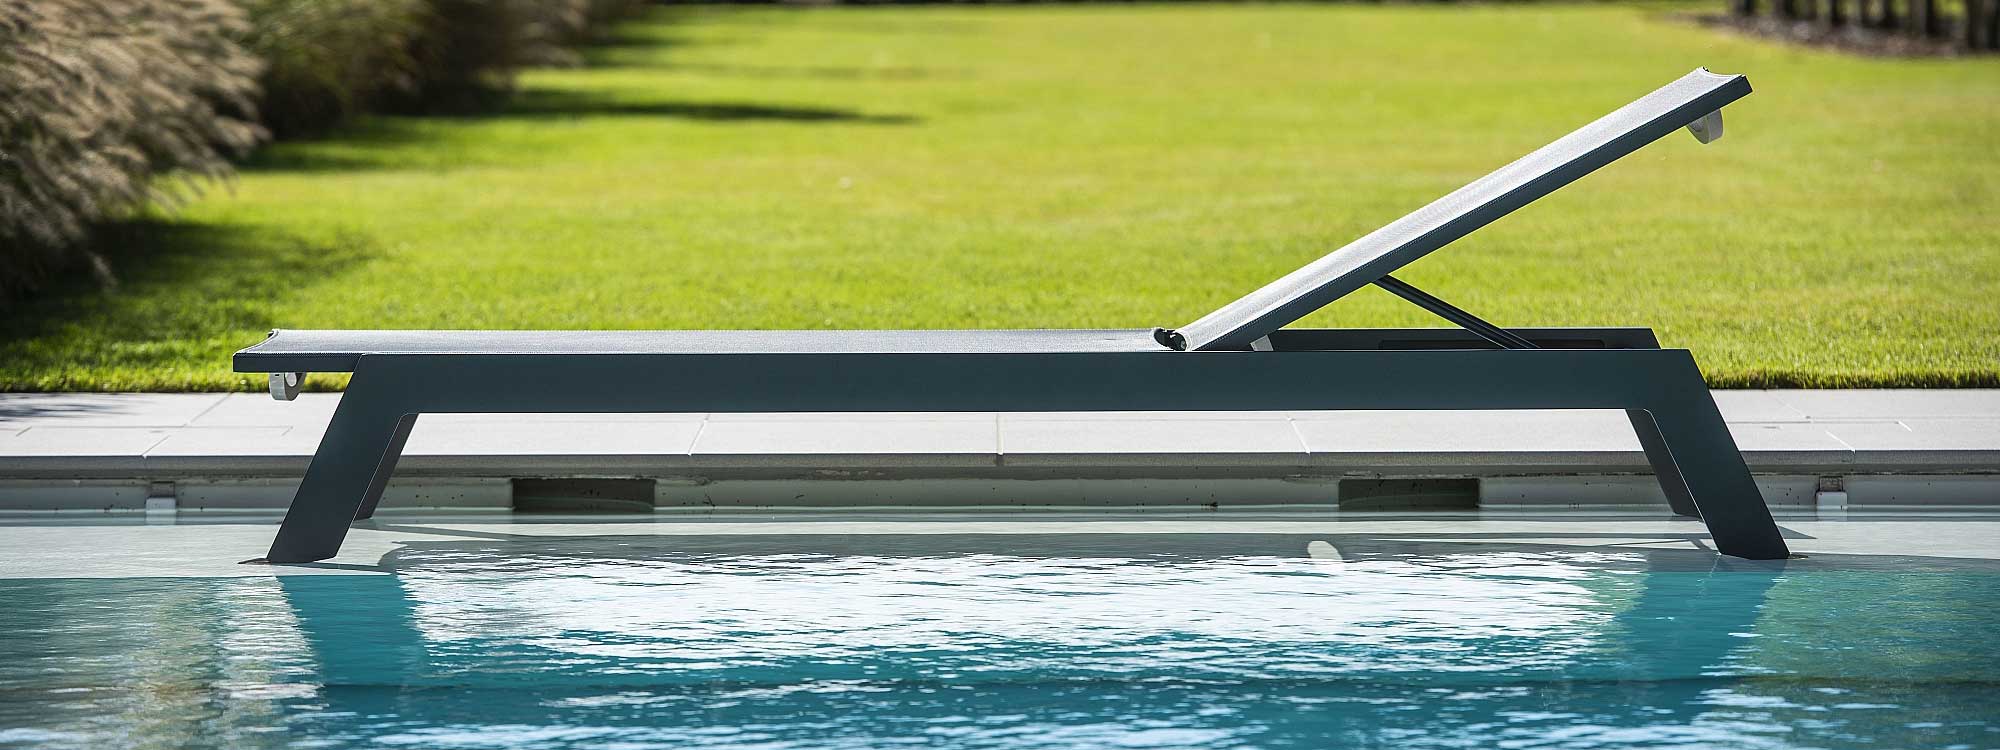 Image of Vigo XL modern sun lounger by Jati & Kebon, placed in shallow water of swimming pool